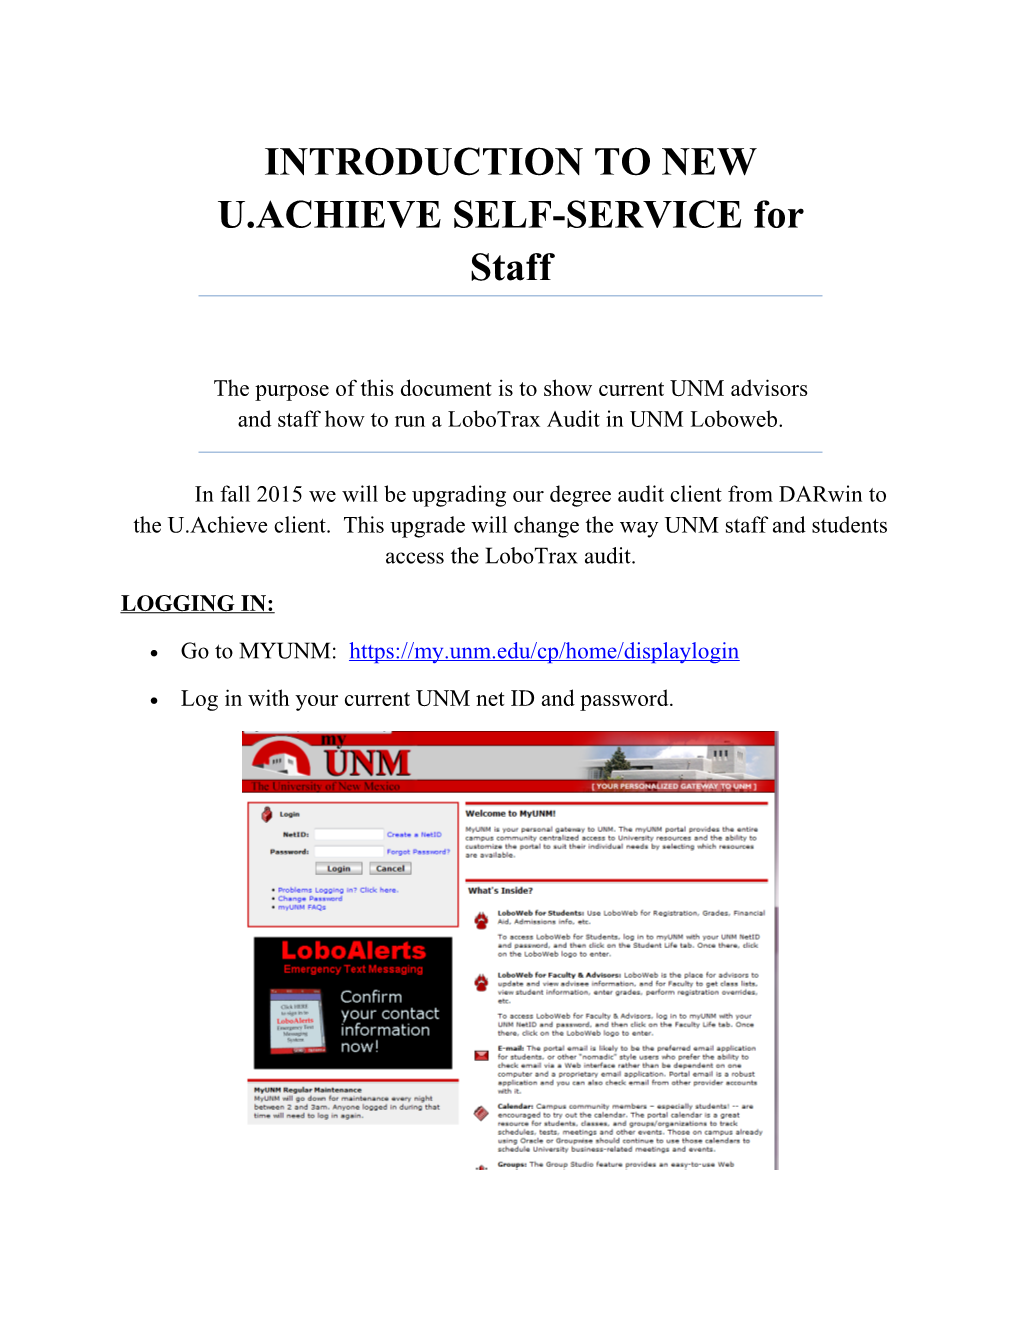 INTRODUCTION to NEW U.ACHIEVE SELF-SERVICE for Staff